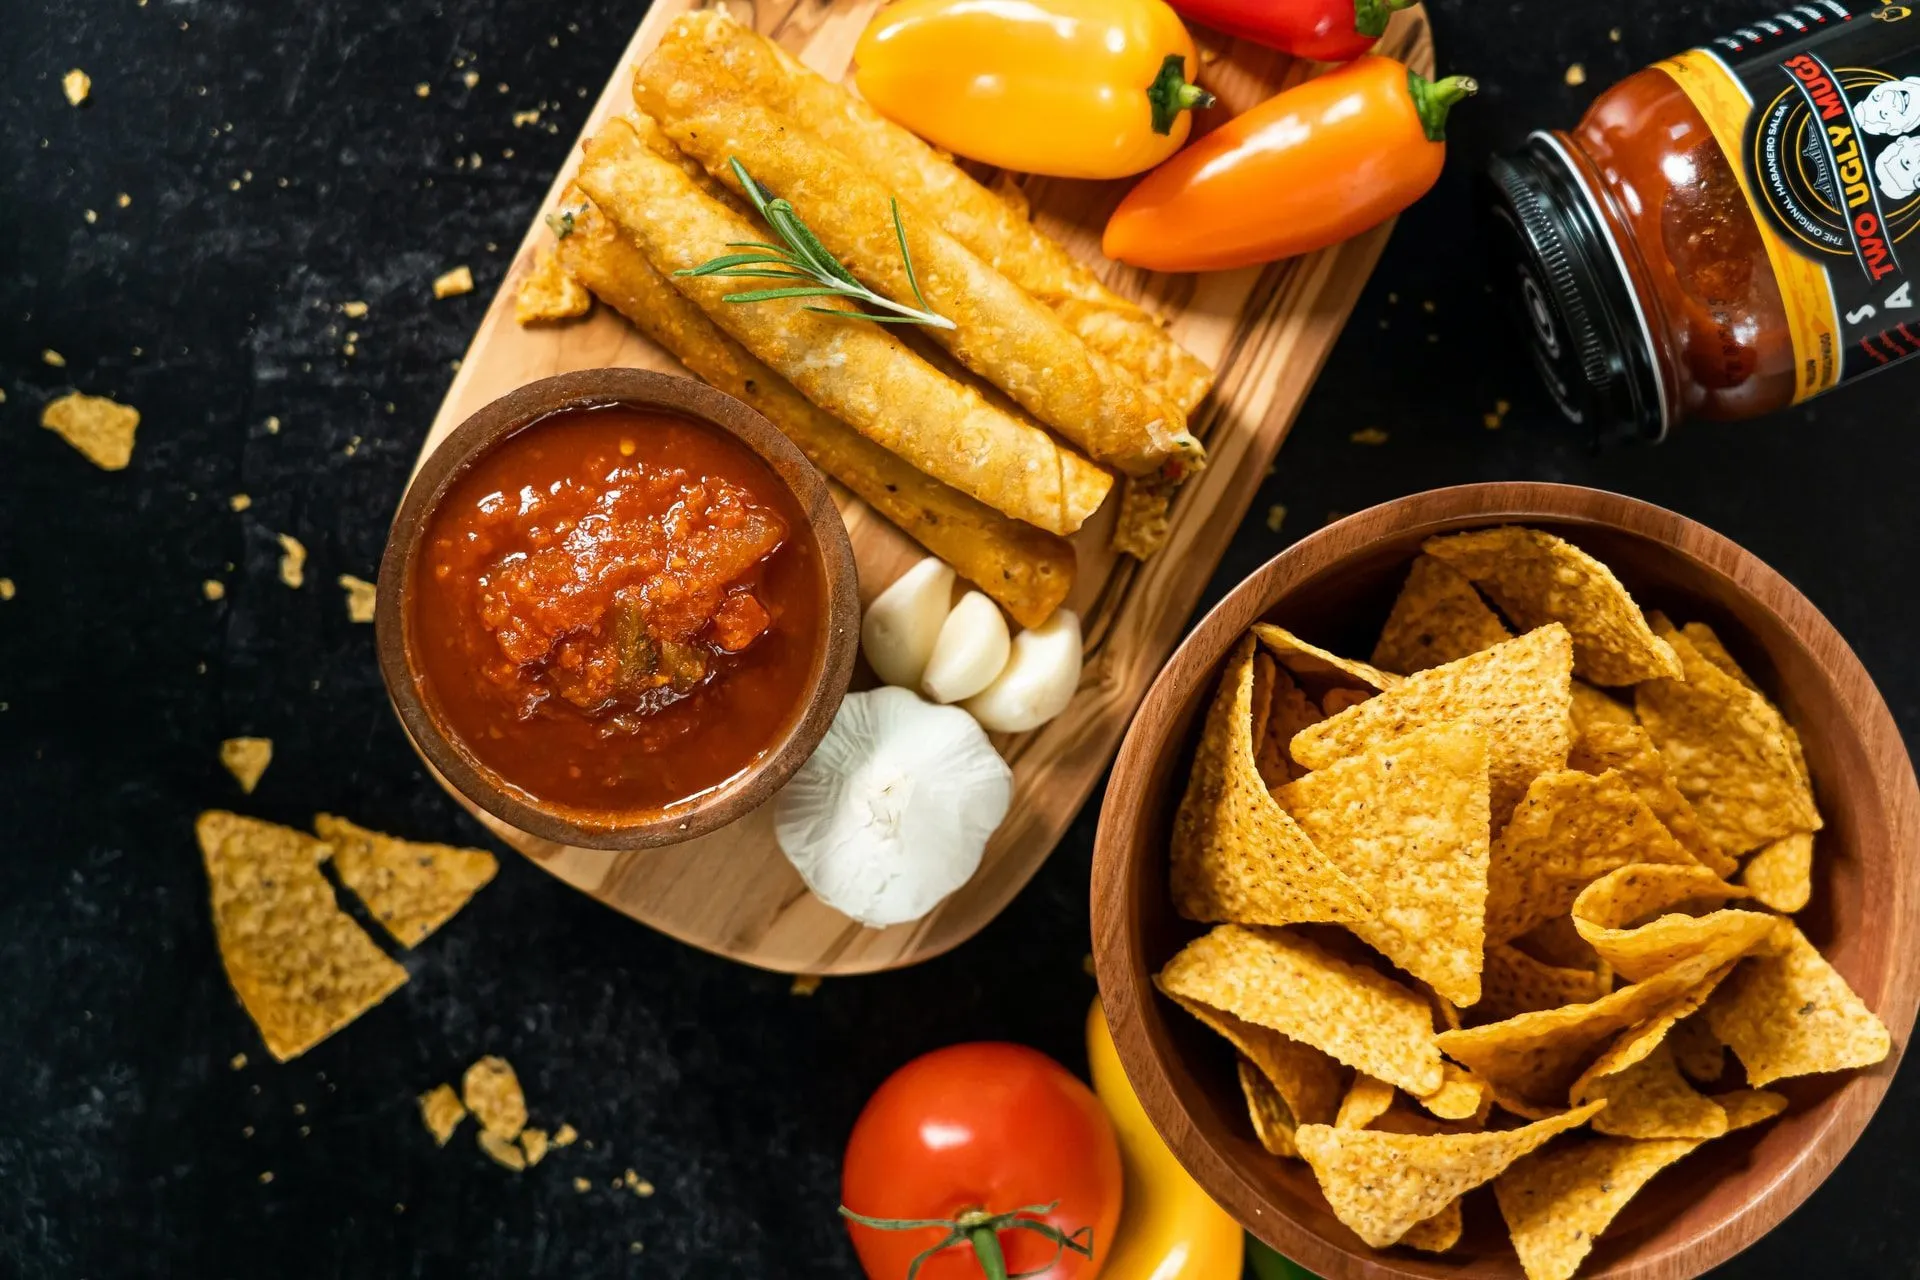 This crunchy triangle pairs well with dips and salsa.